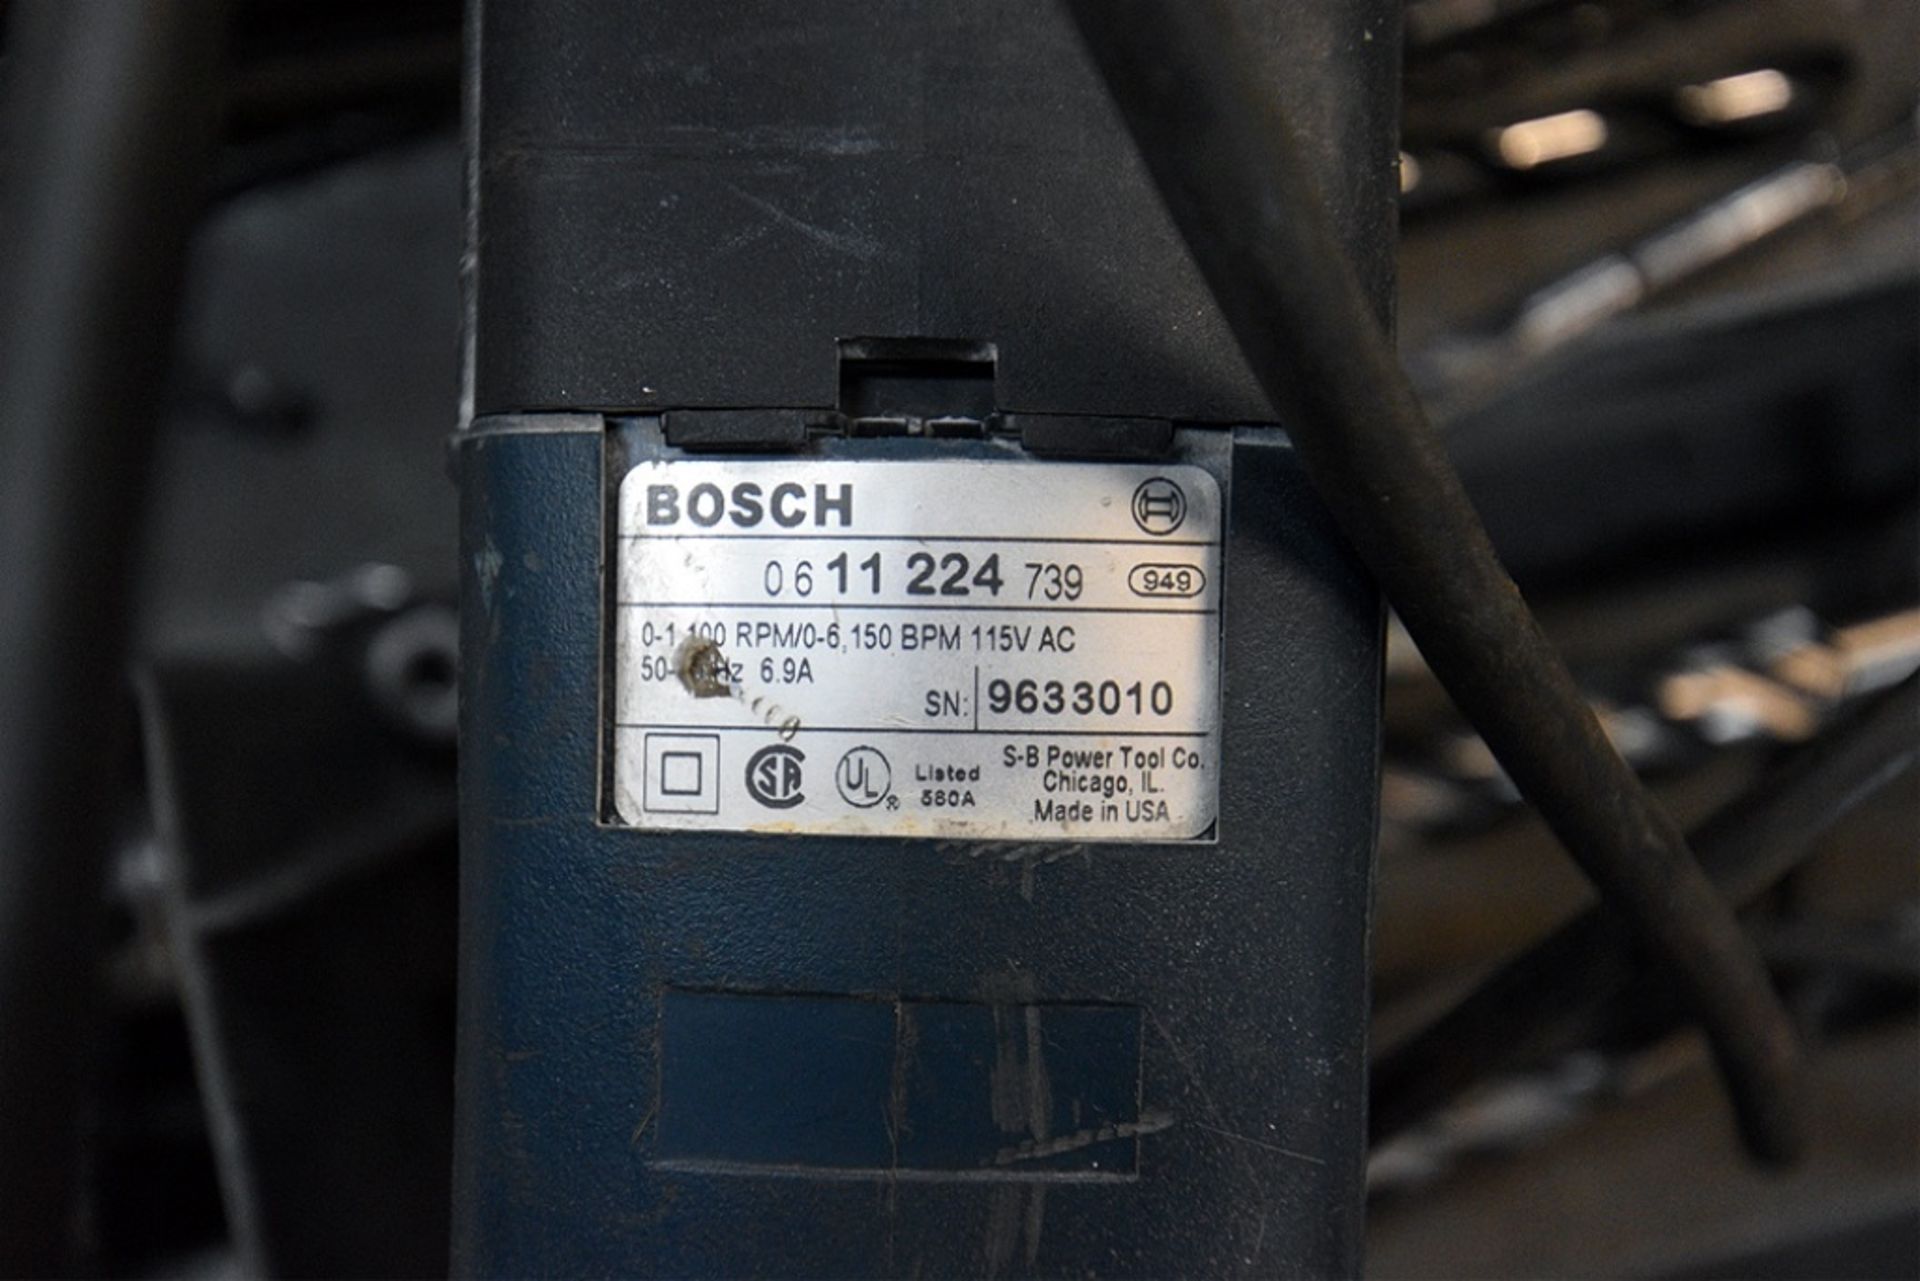 Bosch Bulldog Model 11224VSM 7/8" SDS + Corded Rotary Hammer w/ Case and Bits - Image 3 of 4